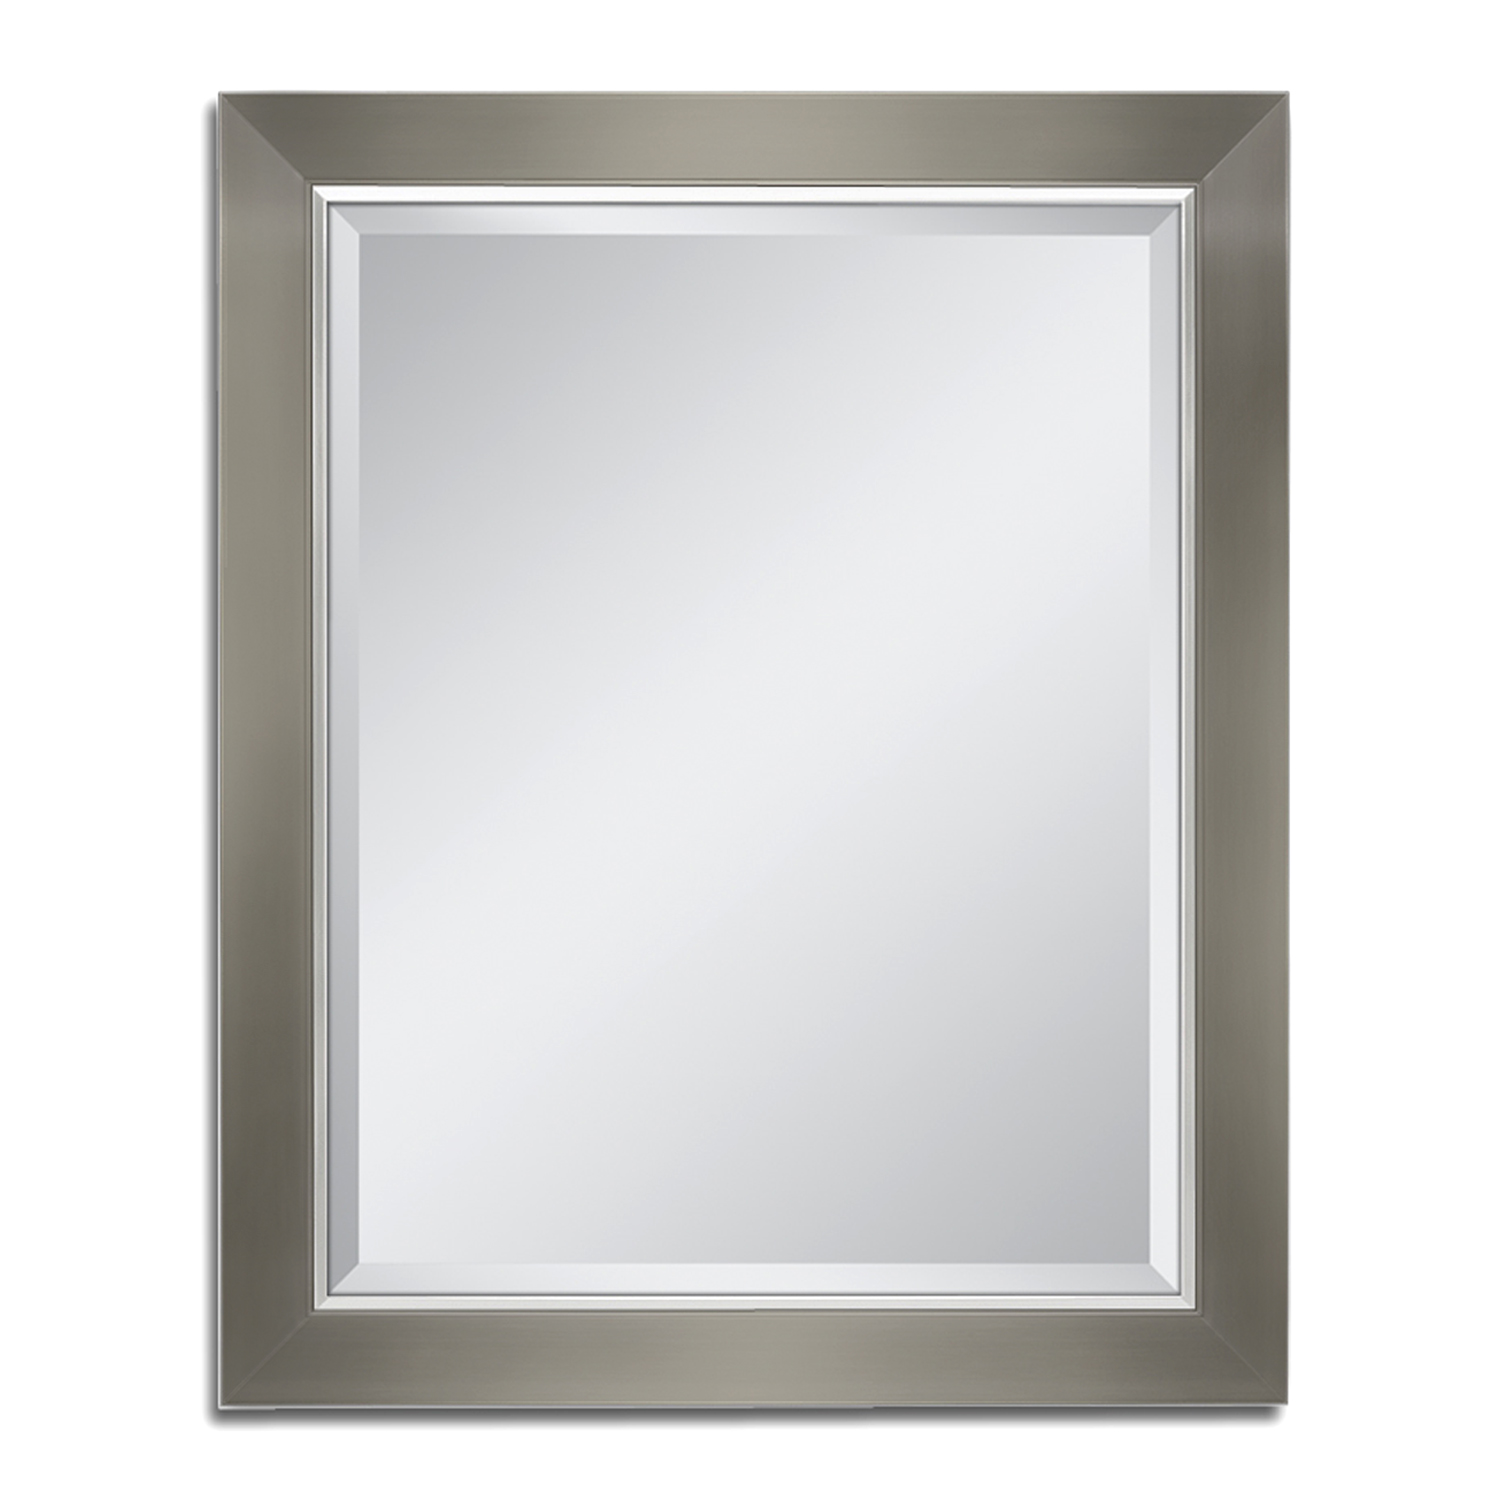 8047 35 X 45 In. Brush Nickel With Chrome Liner Mirror